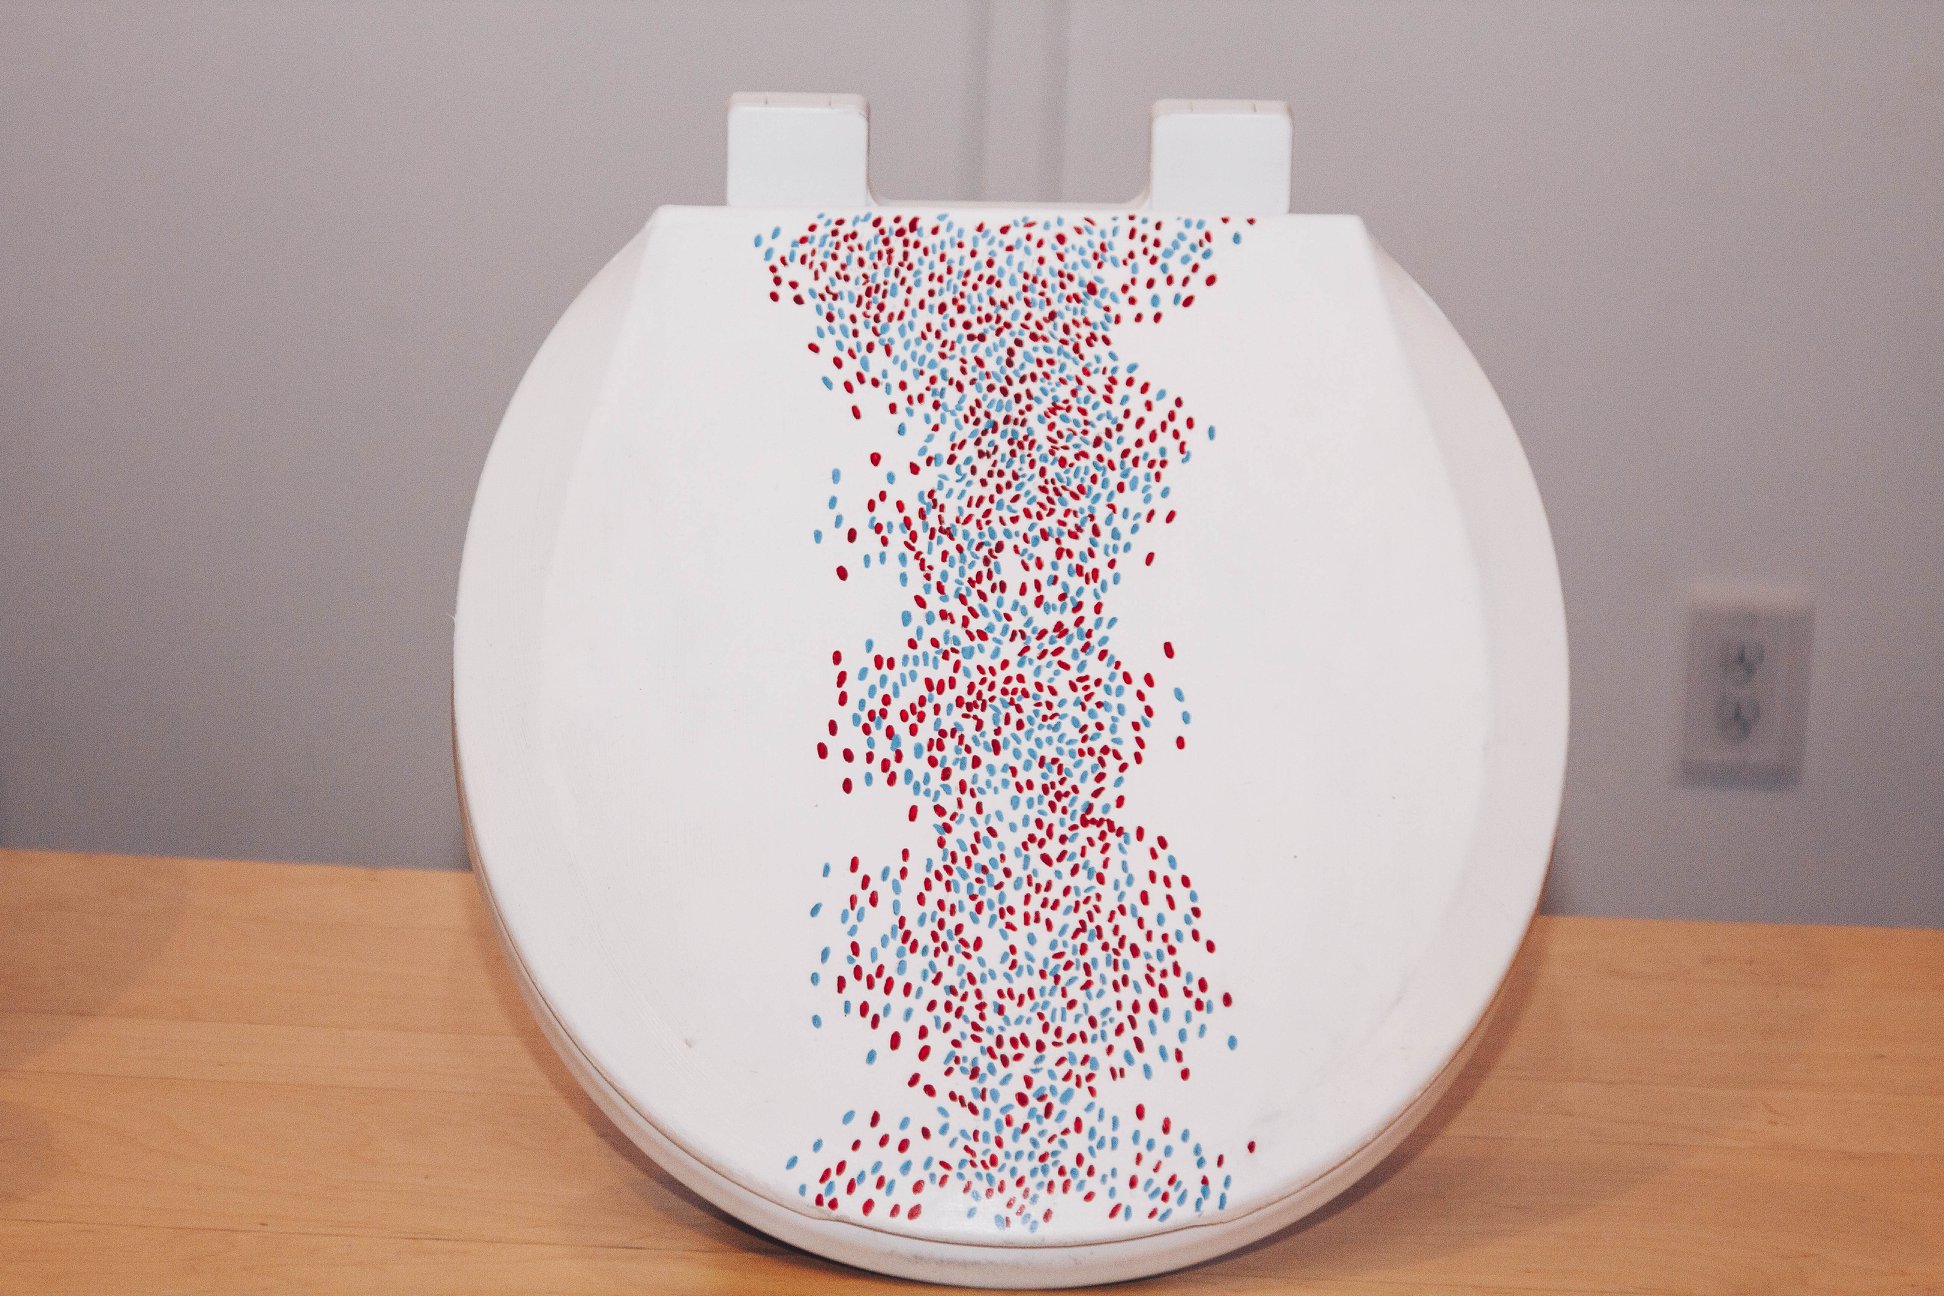 A white toilet with a flock of red and blue dots elegantly moving up the middle of the toilet seat.